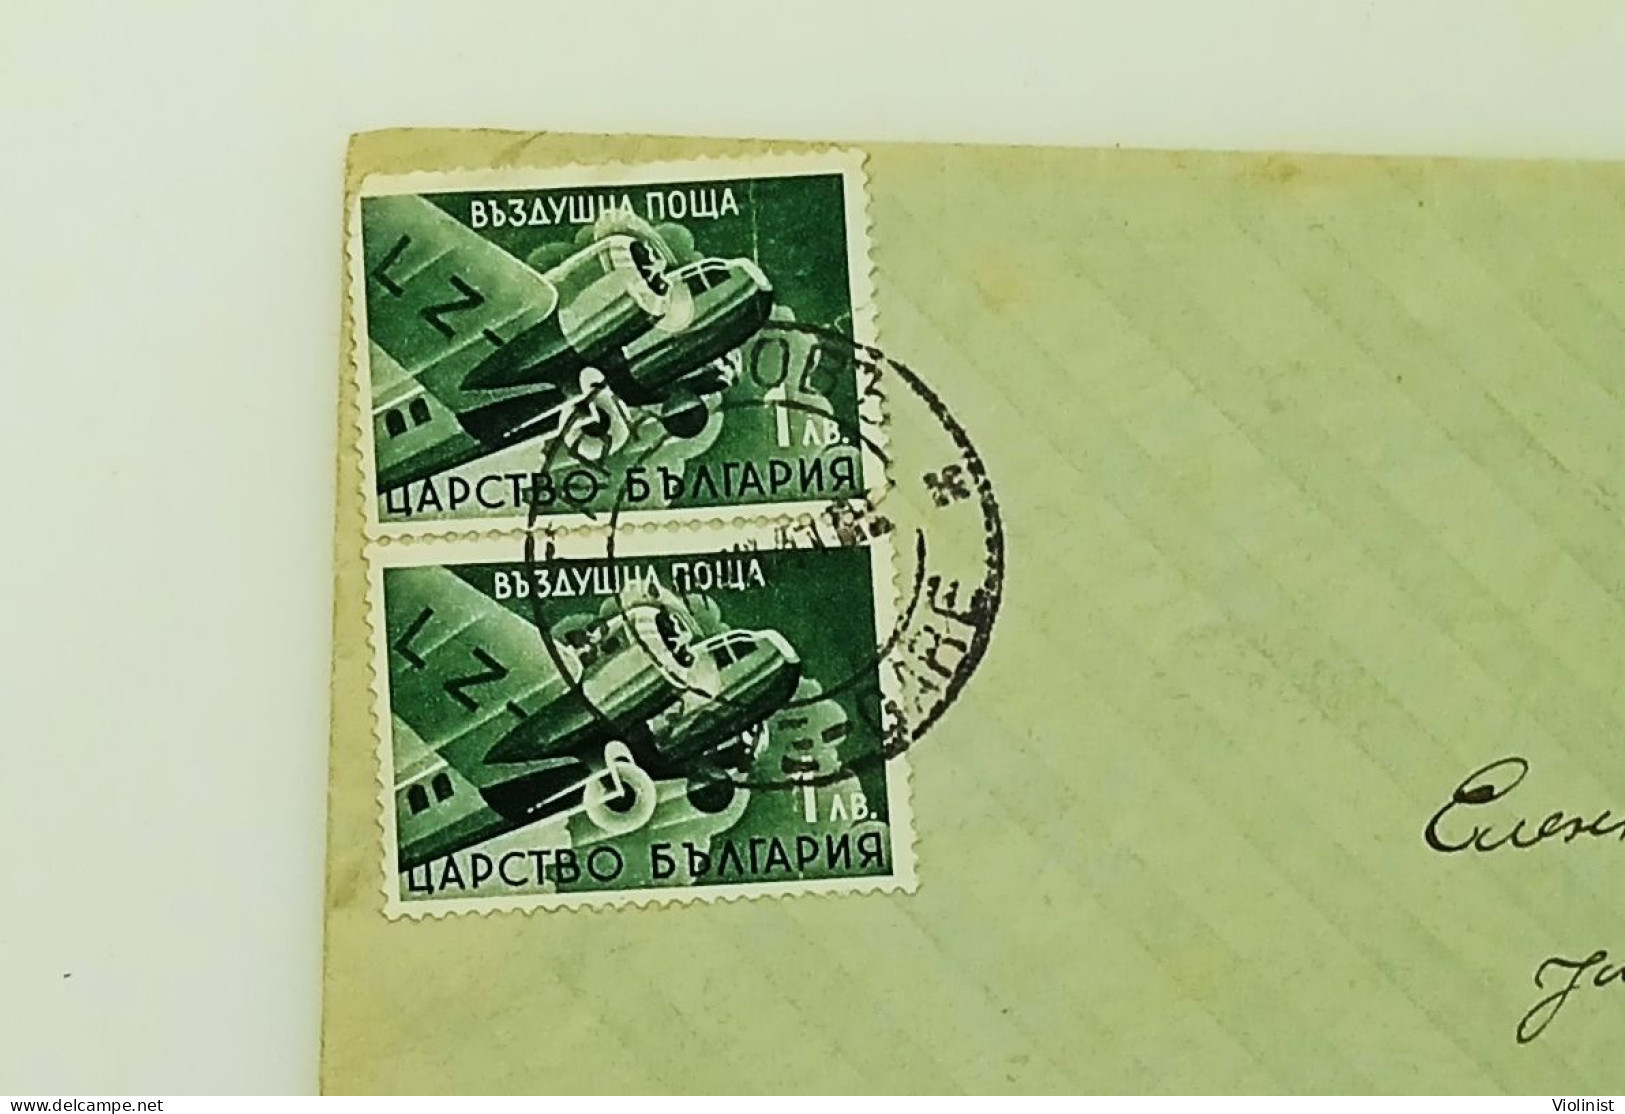 Bulgaria-Envelope Sent By Airmail In 1941. - Airmail